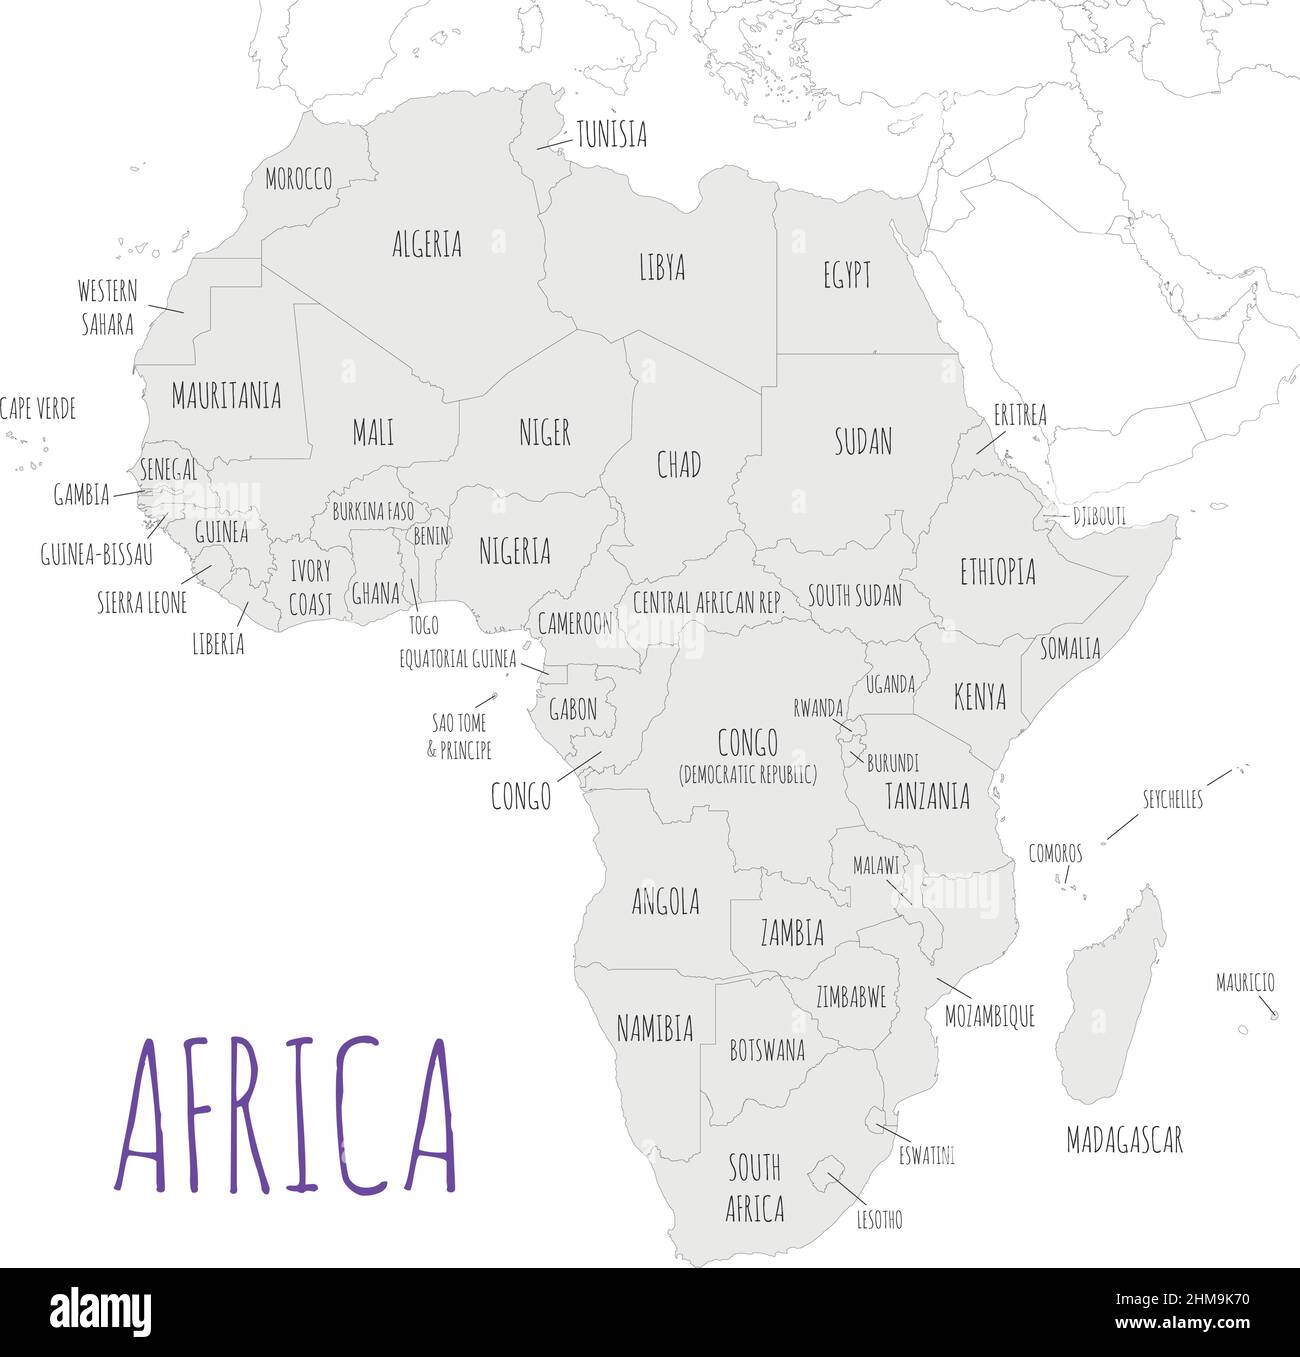 Political Africa Map vector illustration isolated in white background. Editable and clearly labeled layers. Stock Vector